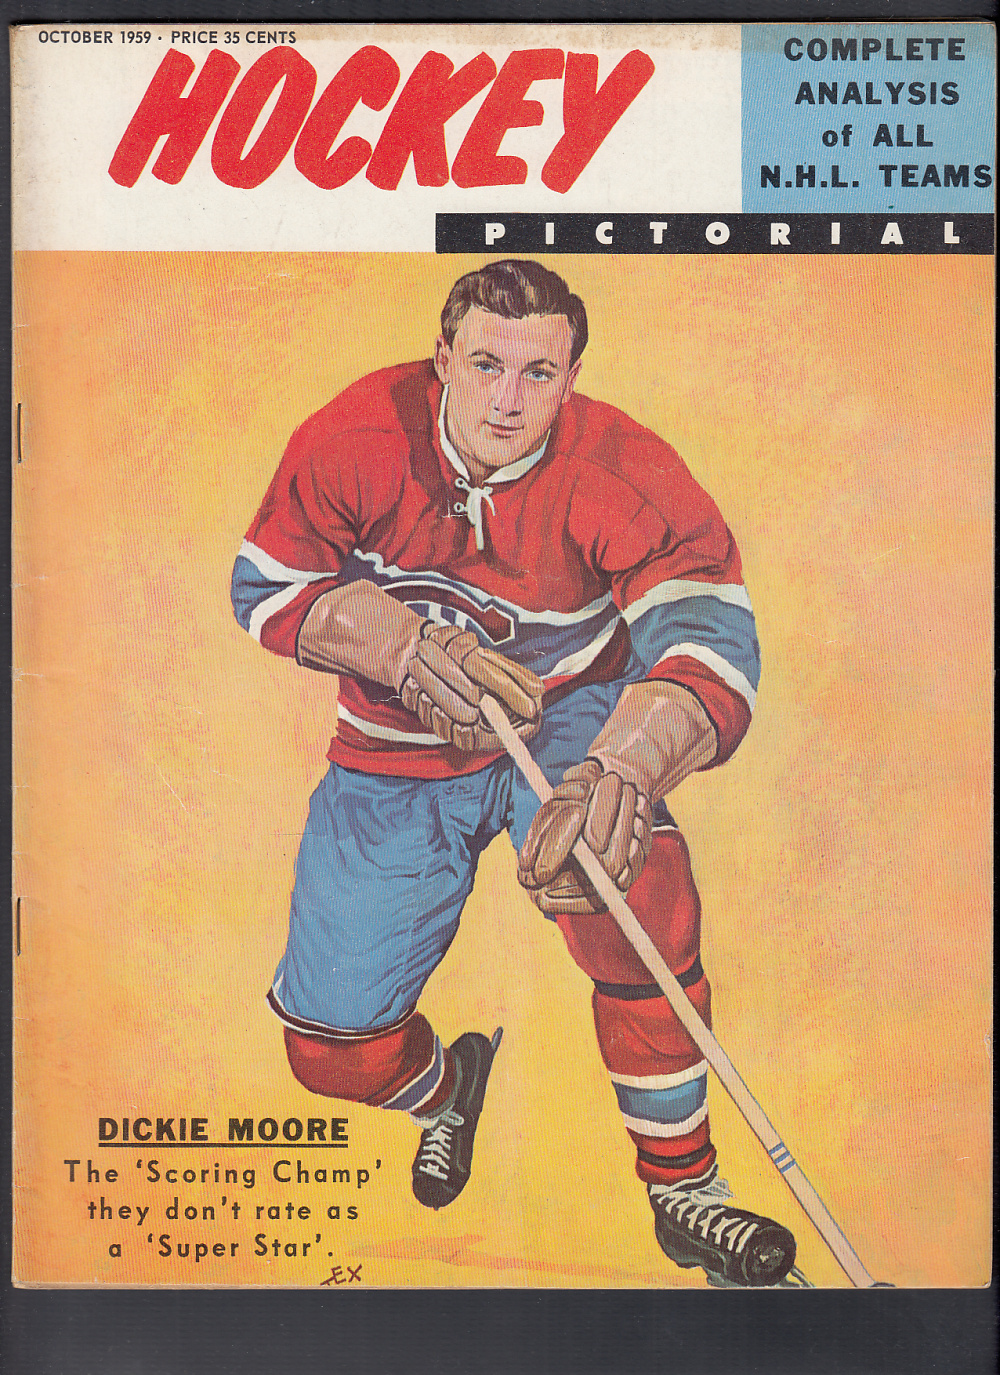 1959 HOCKEY PICTORIAL MAGAZINE D. MOORE ON COVER photo